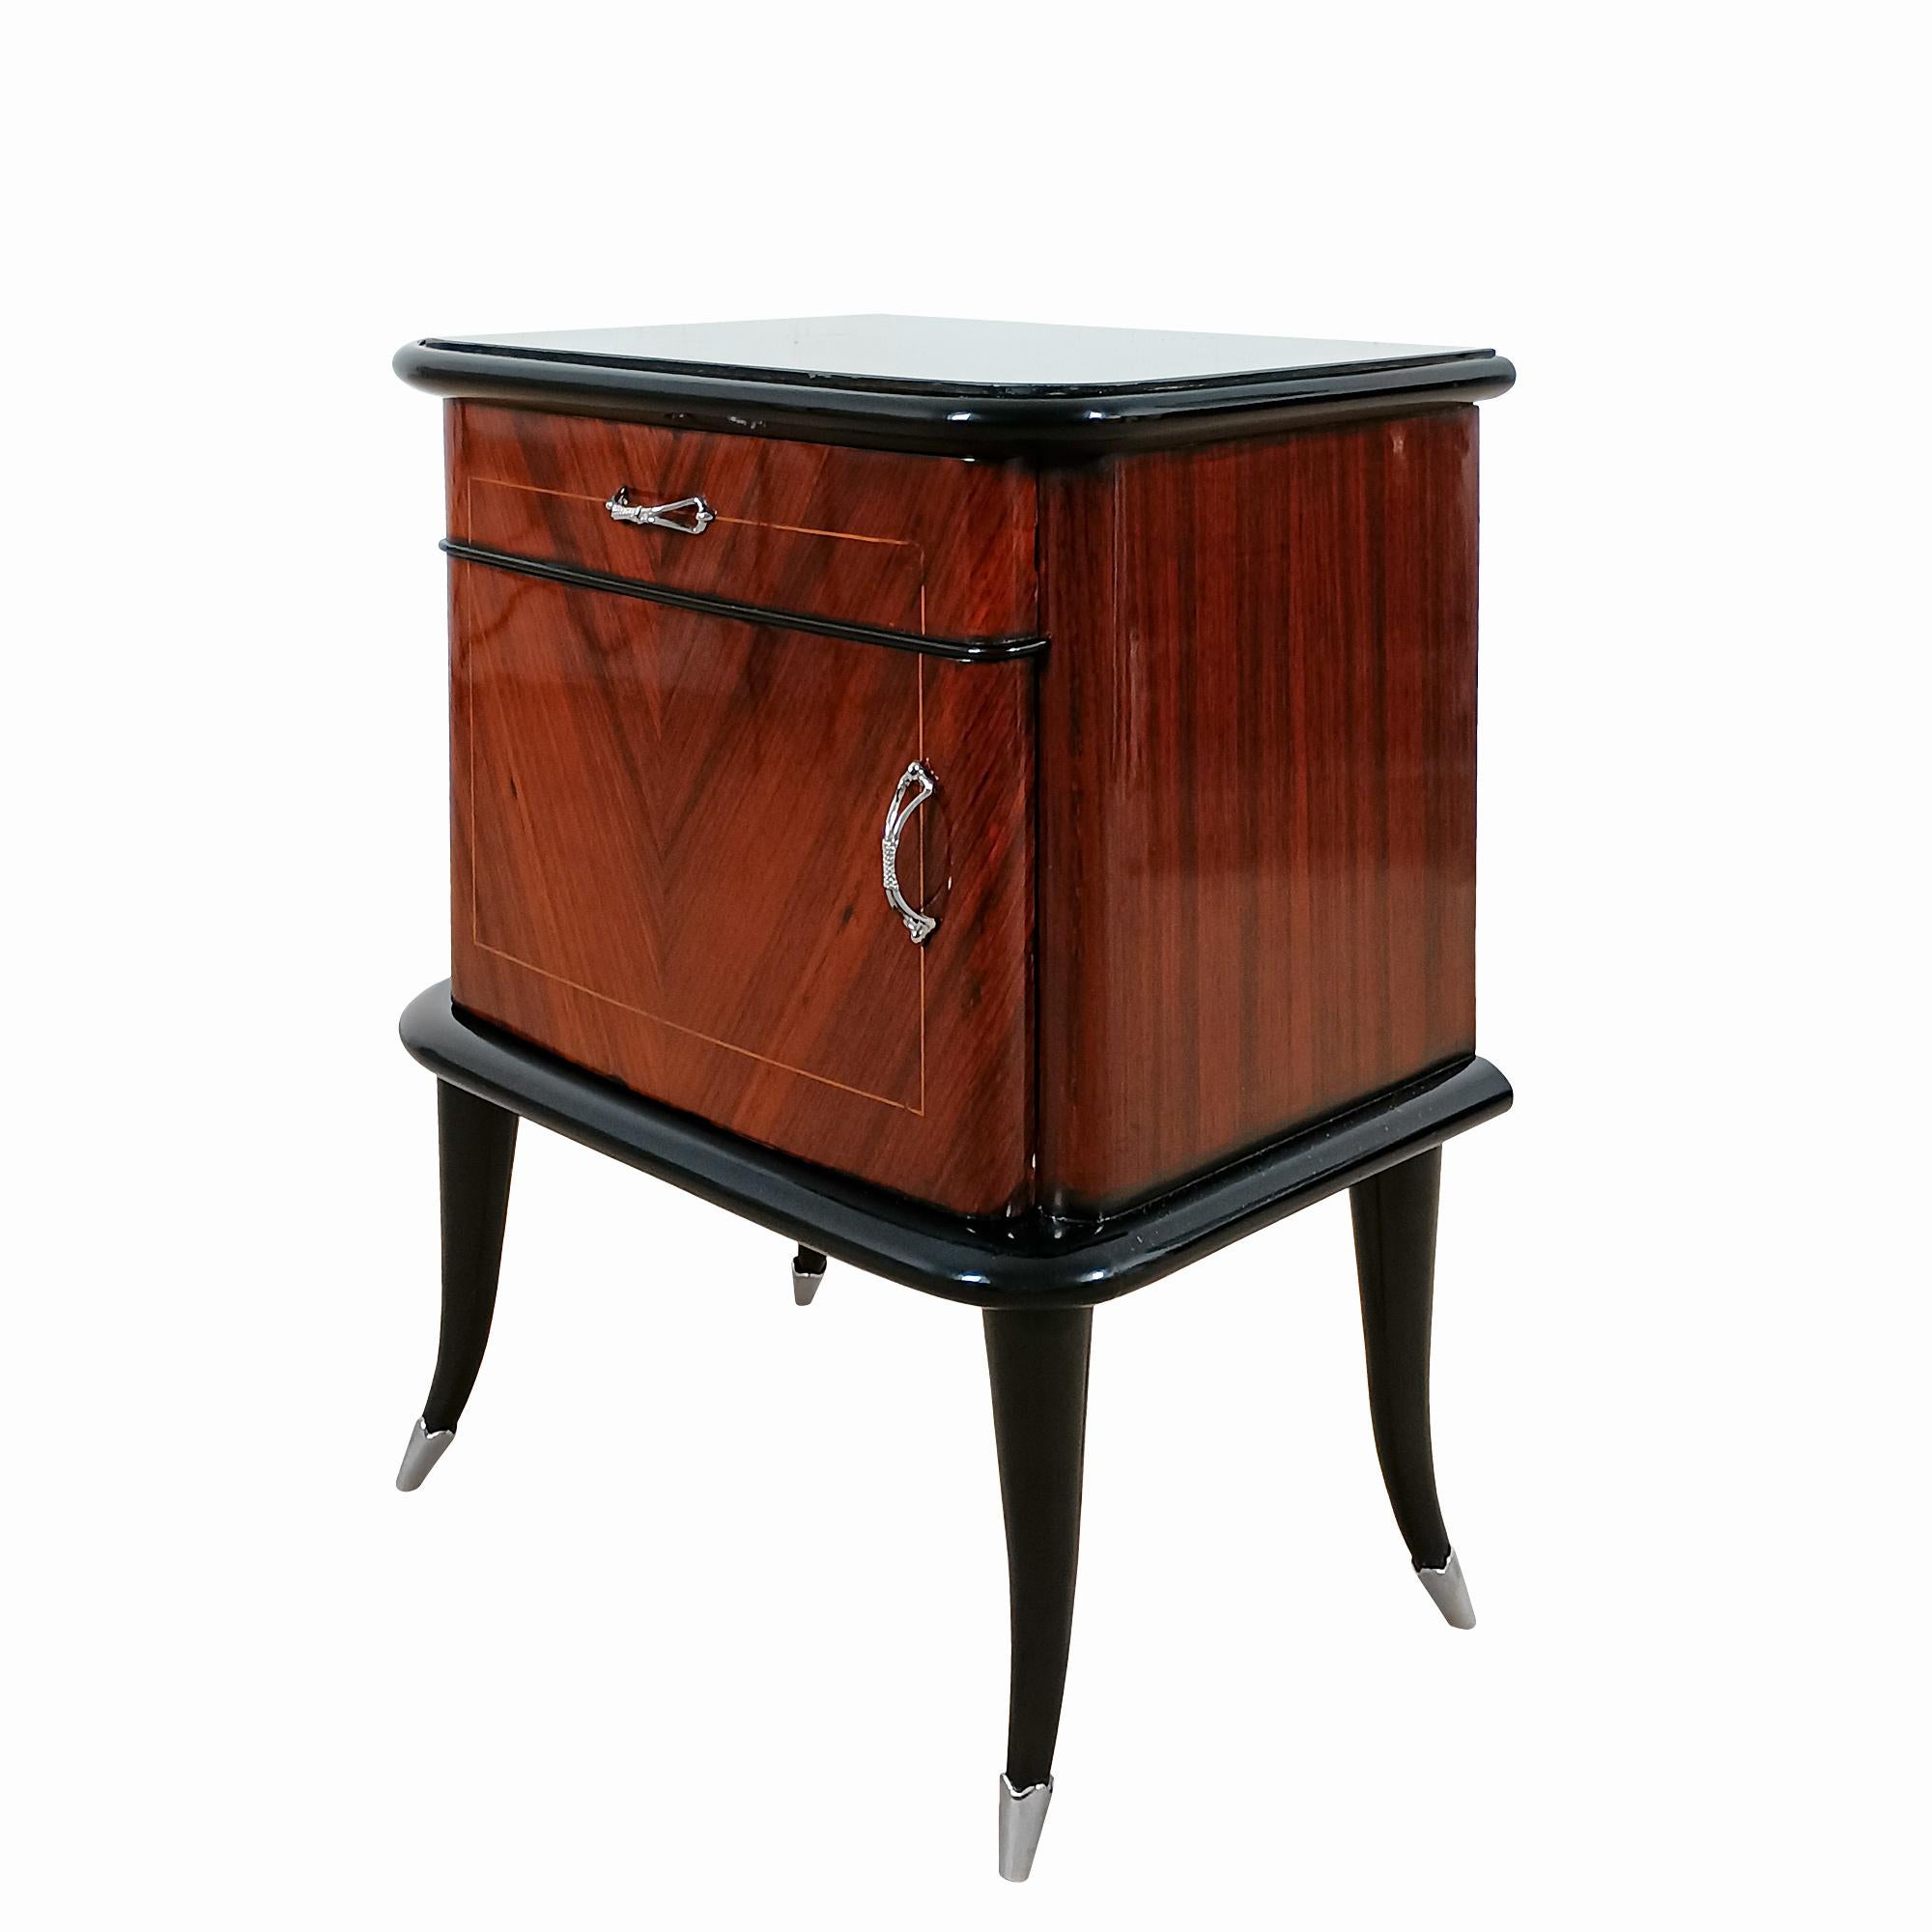 Mid-20th Century Pair Of Mid-Century Modern Nightstands In Blackened Beech - Italy 1940 For Sale